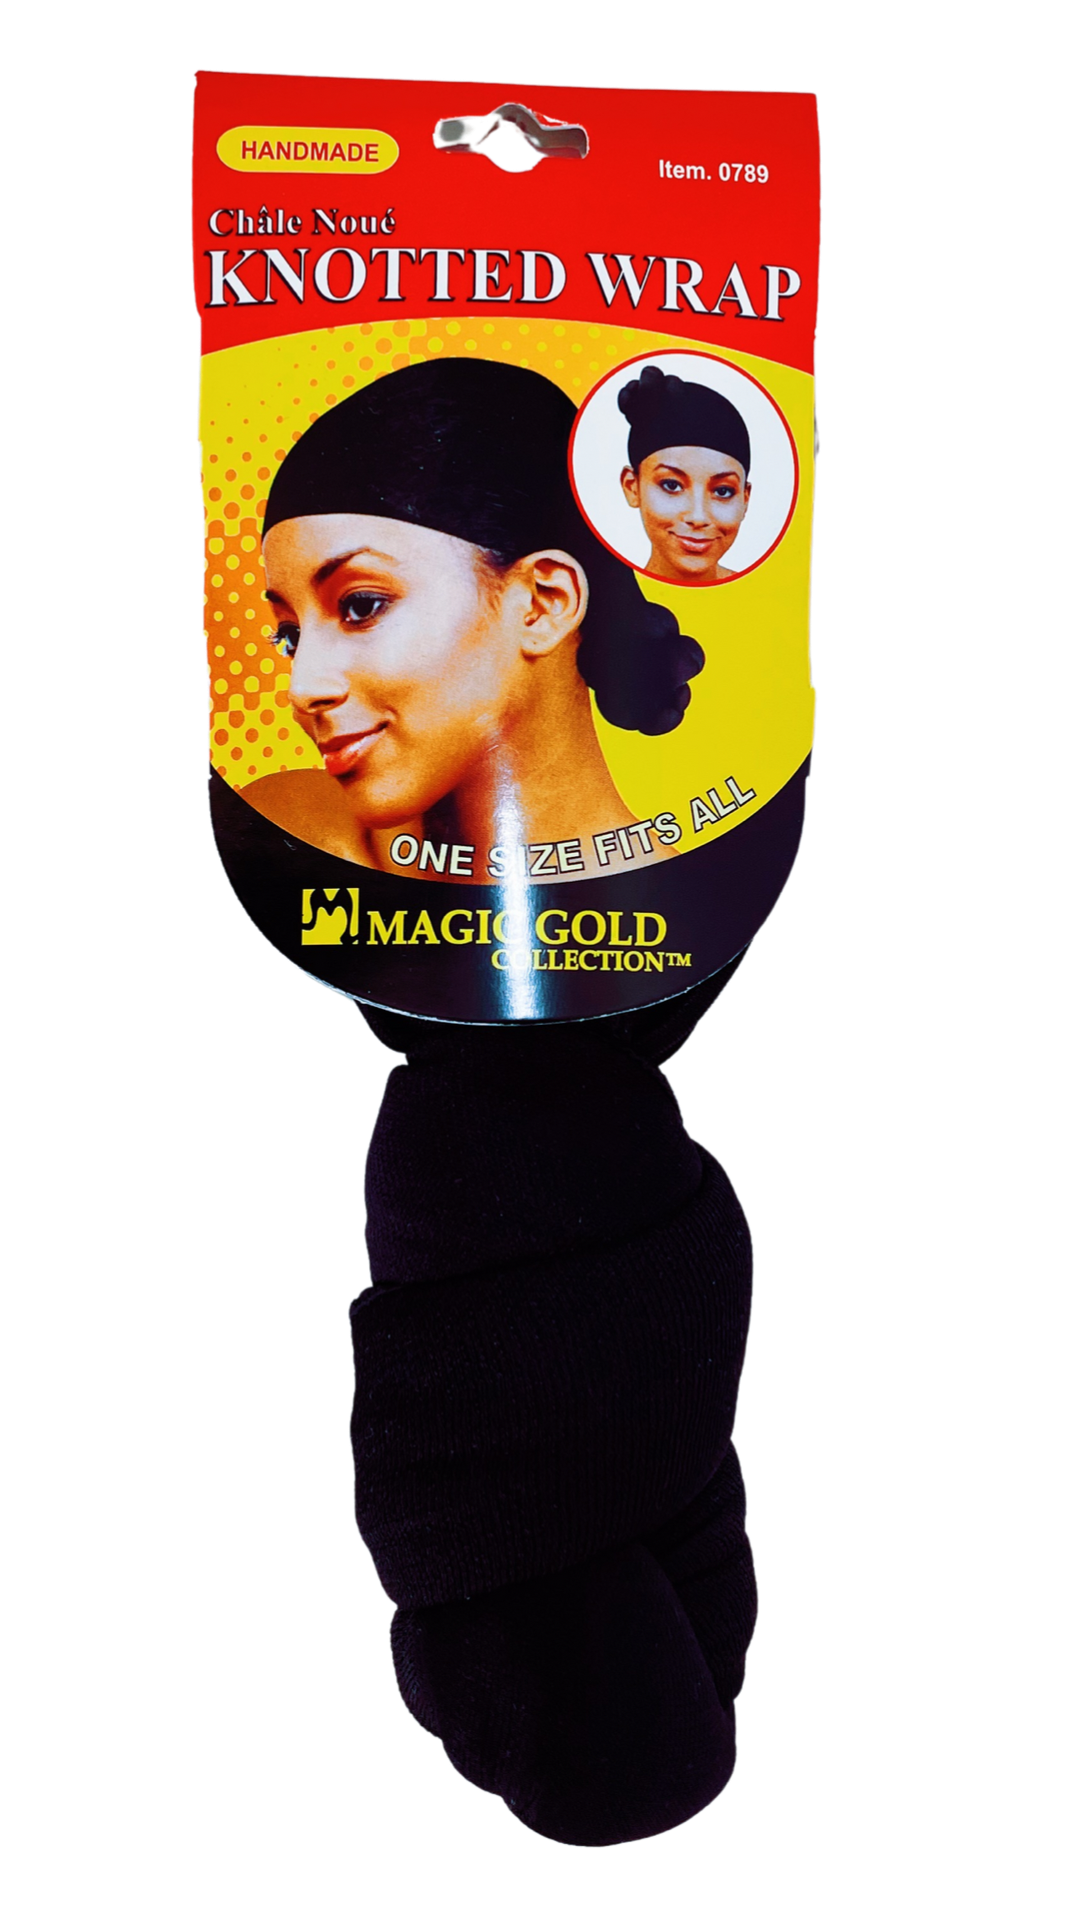 Magic Gold Knotted Wrap Handmade